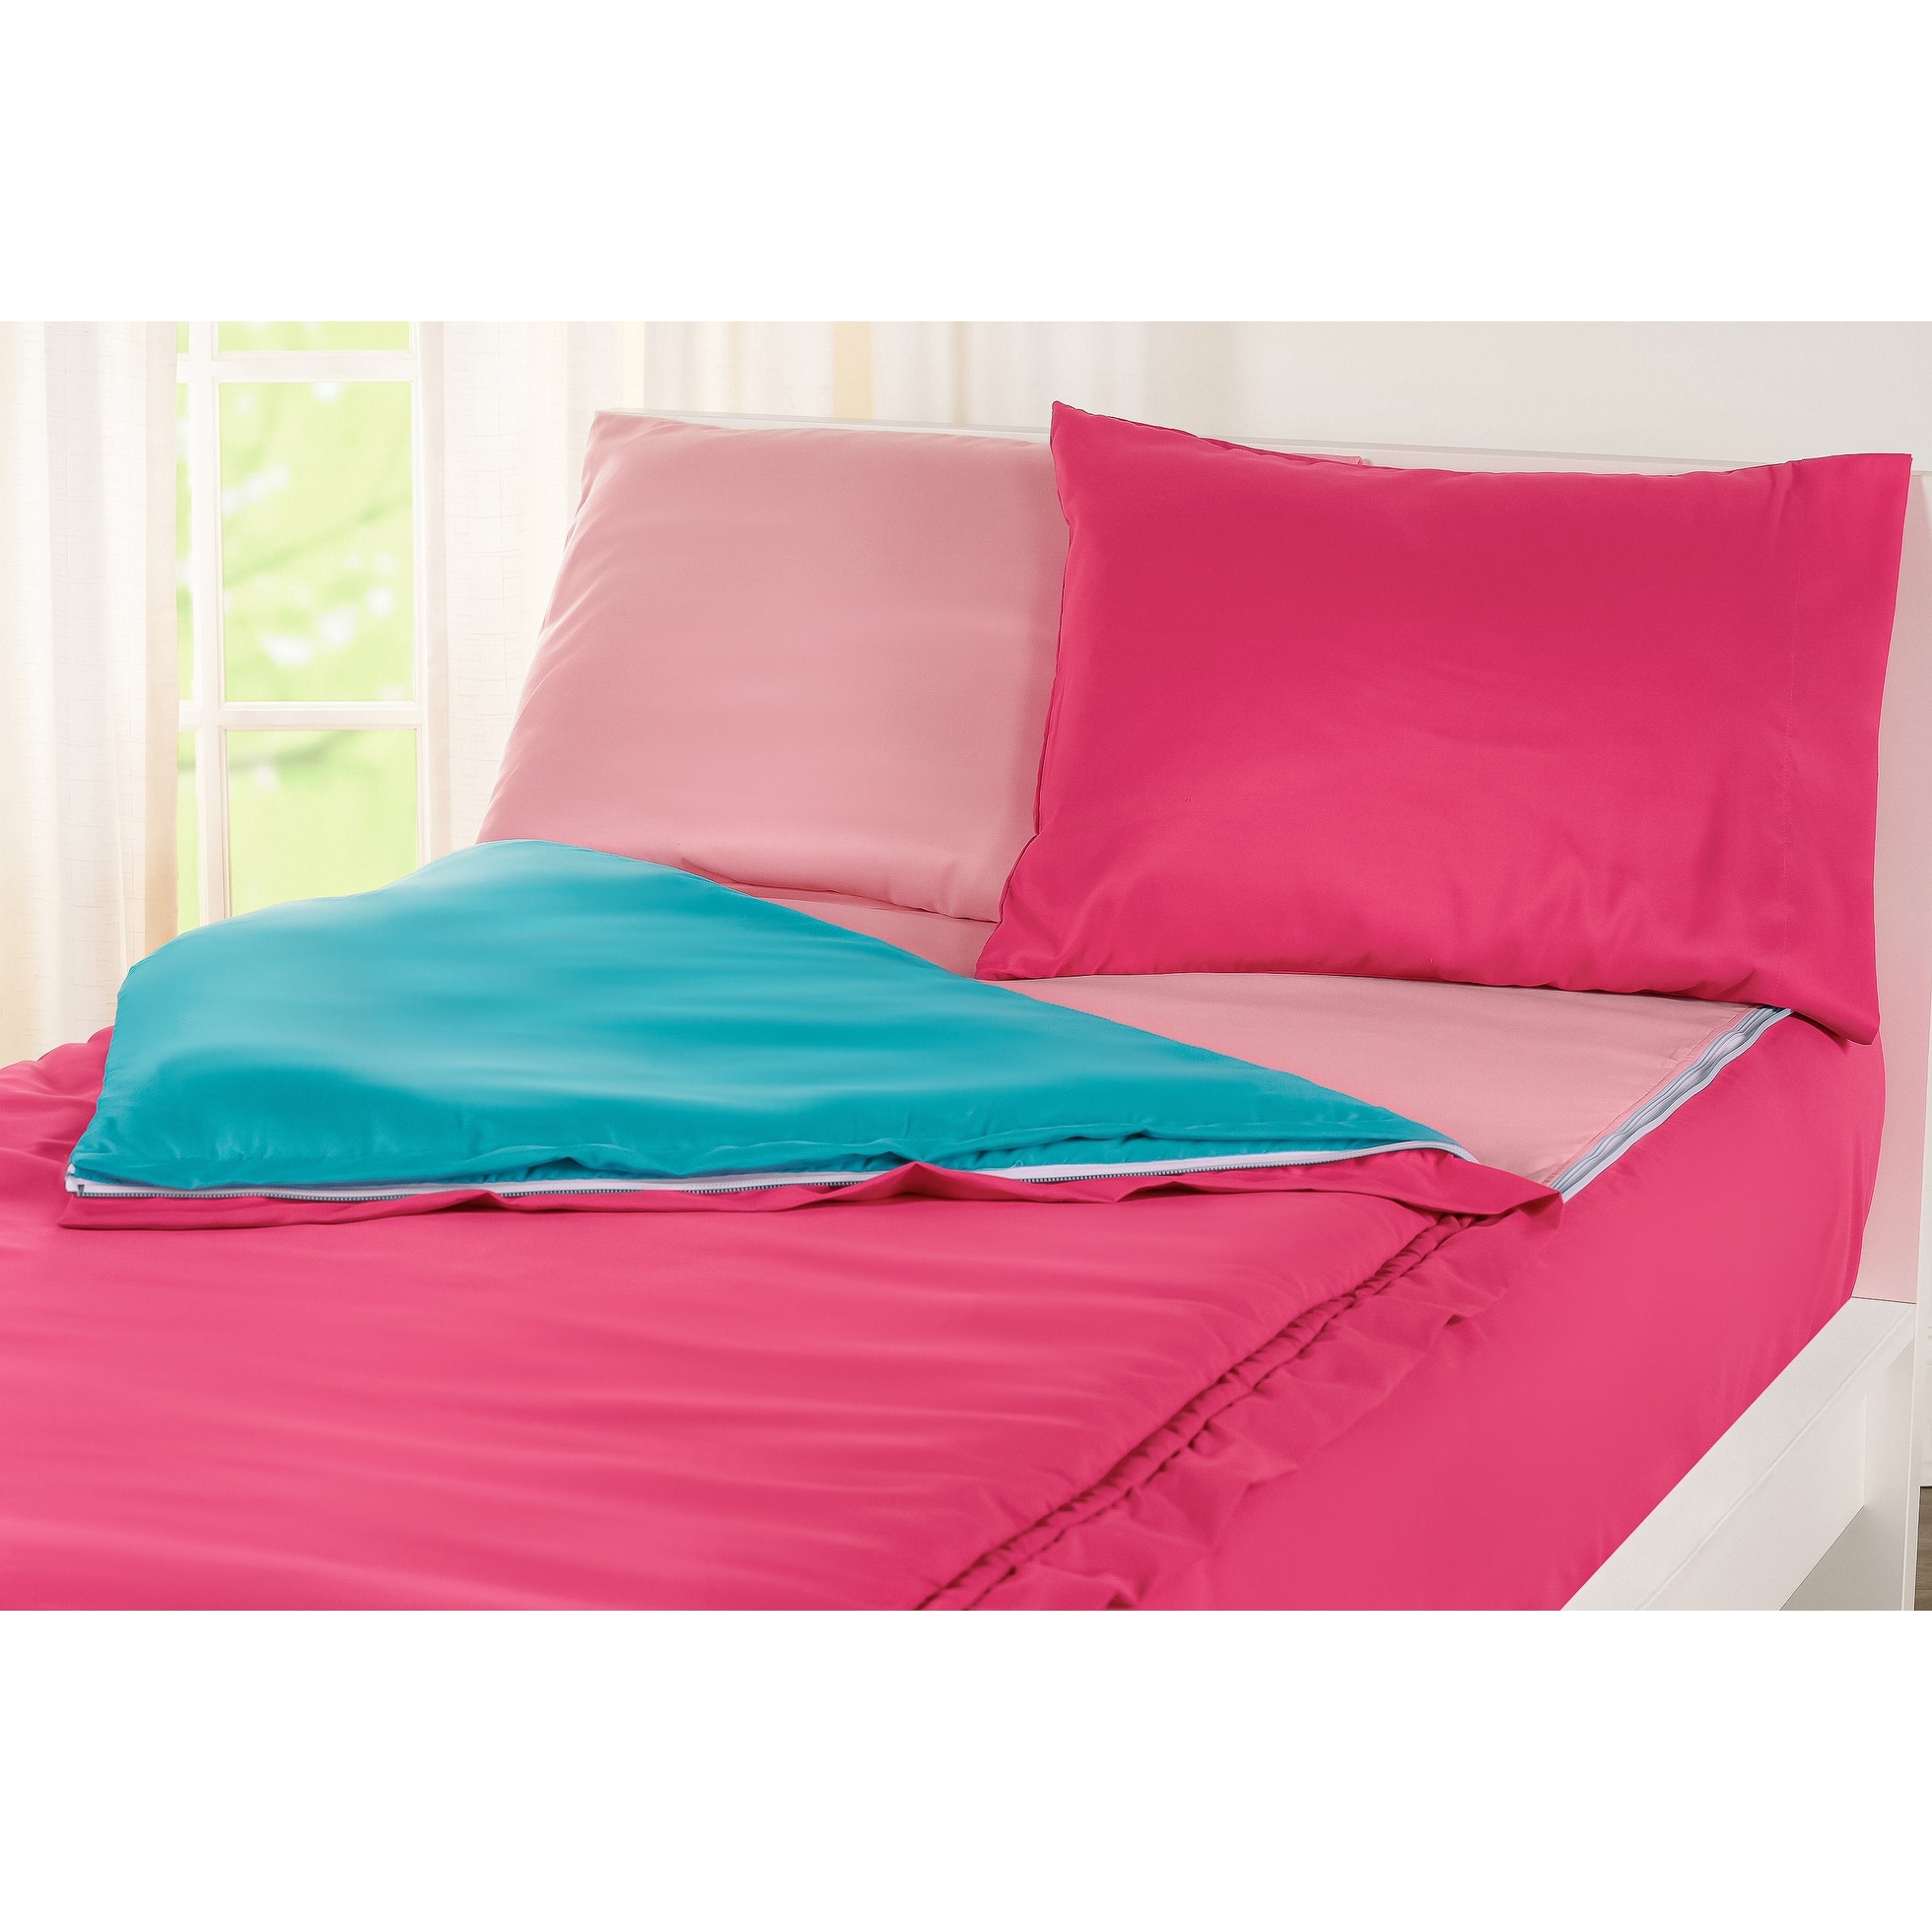 https://ak1.ostkcdn.com/images/products/is/images/direct/78009da09f60cafc86ea2d845caf663802c8040f/Siscovers-Hot-Pink-Bunkie-Deluxe-Zipper-Bedding-Set.jpg